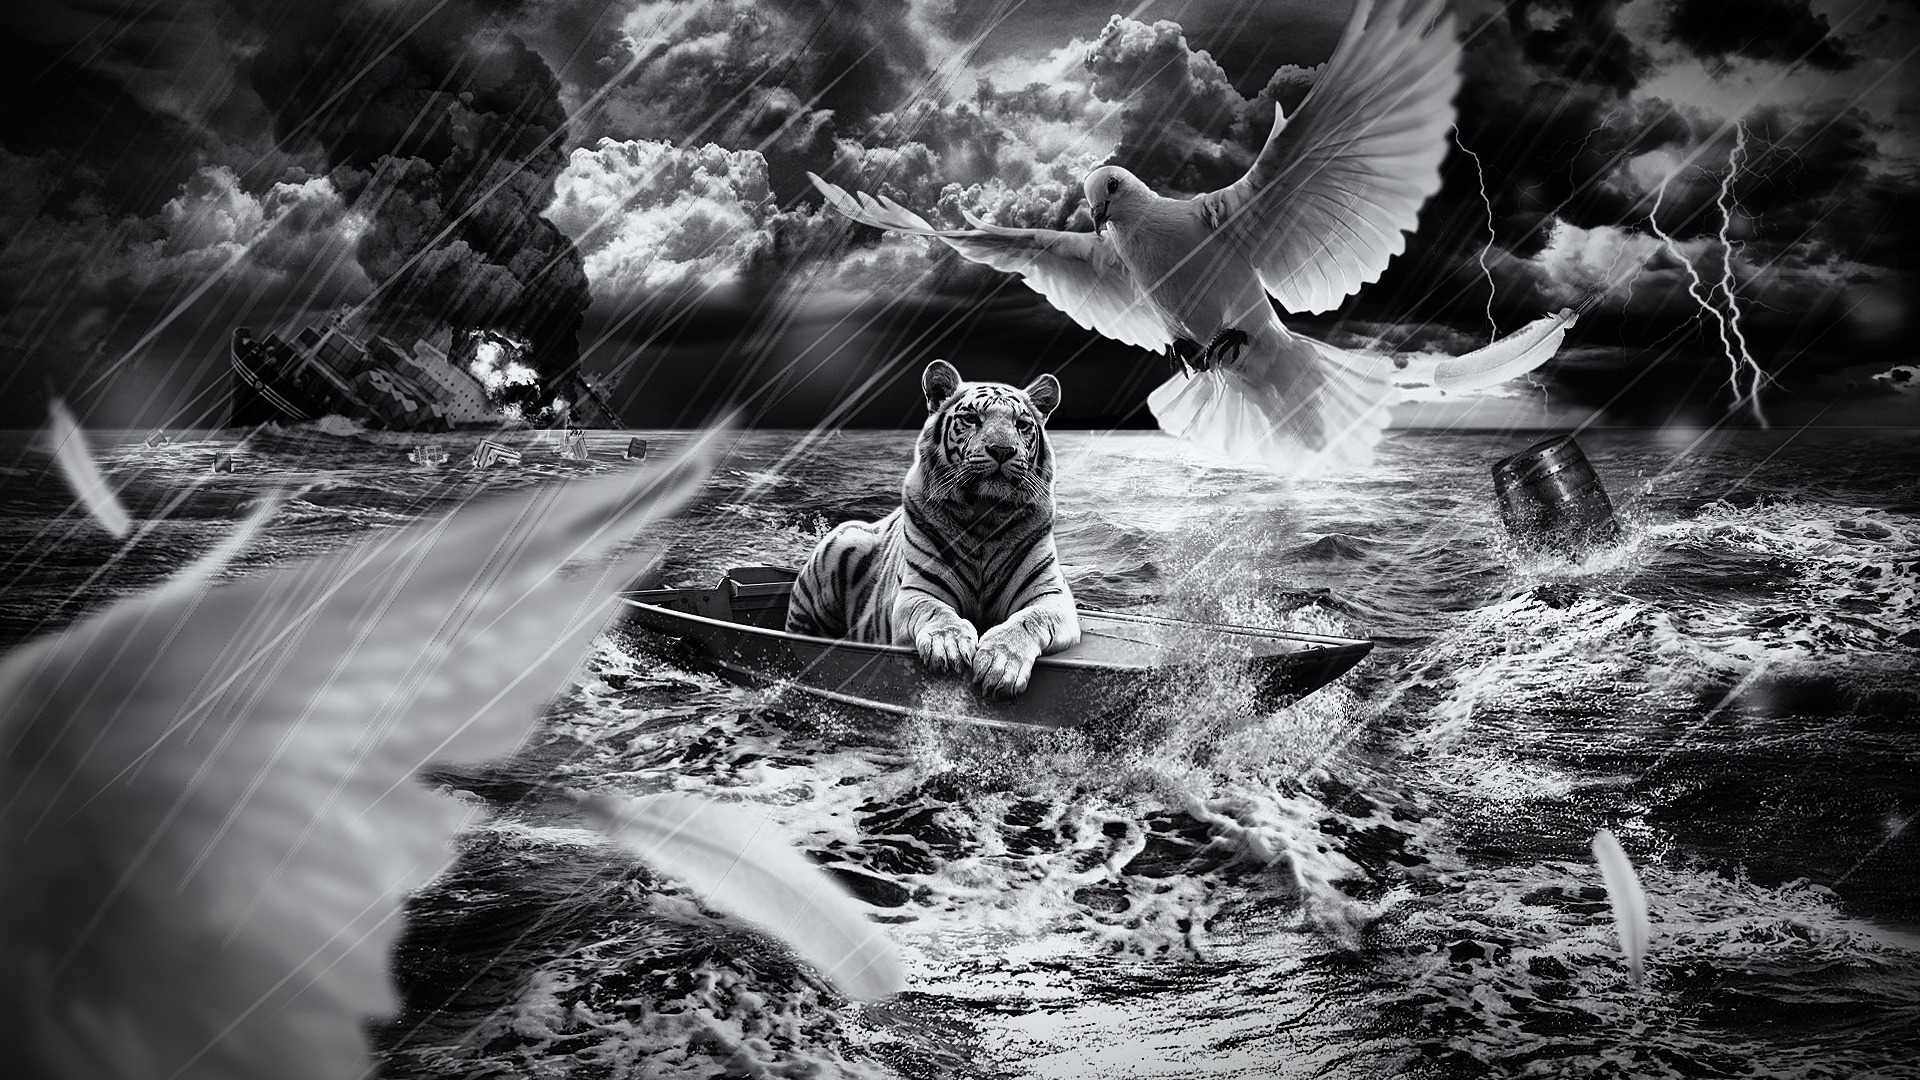 Tiger in a Boat for 1920 x 1080 HDTV 1080p resolution